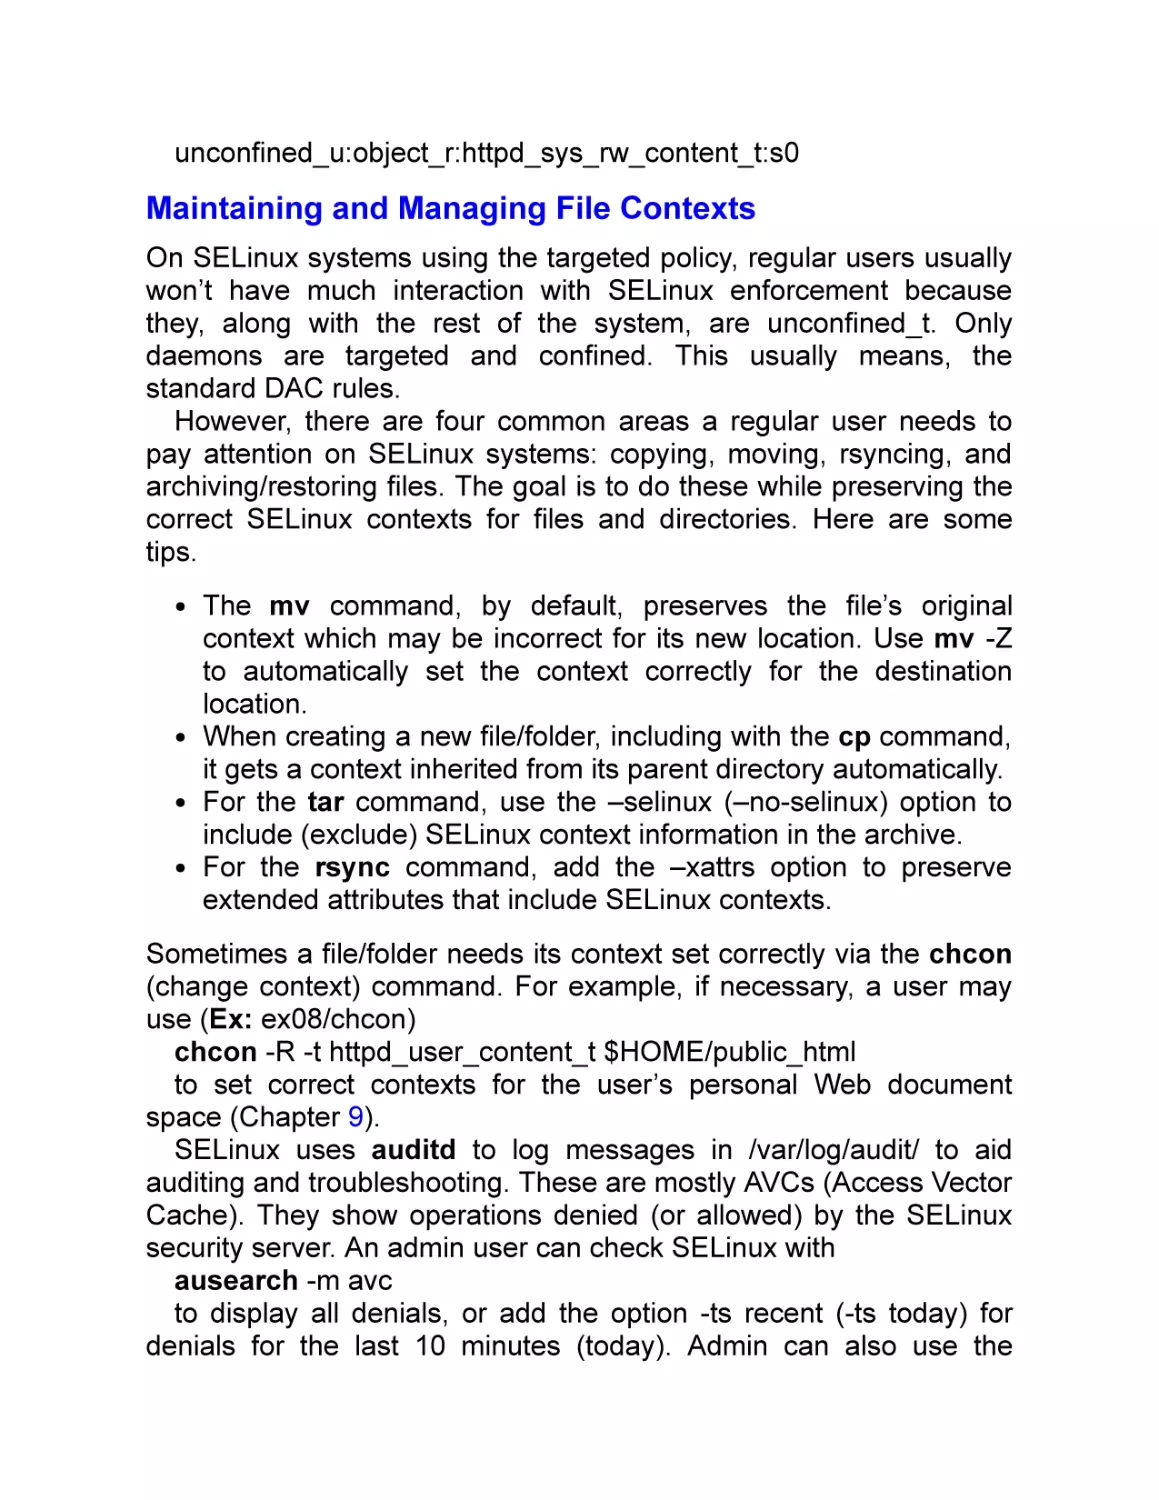 Maintaining and Managing File Contexts